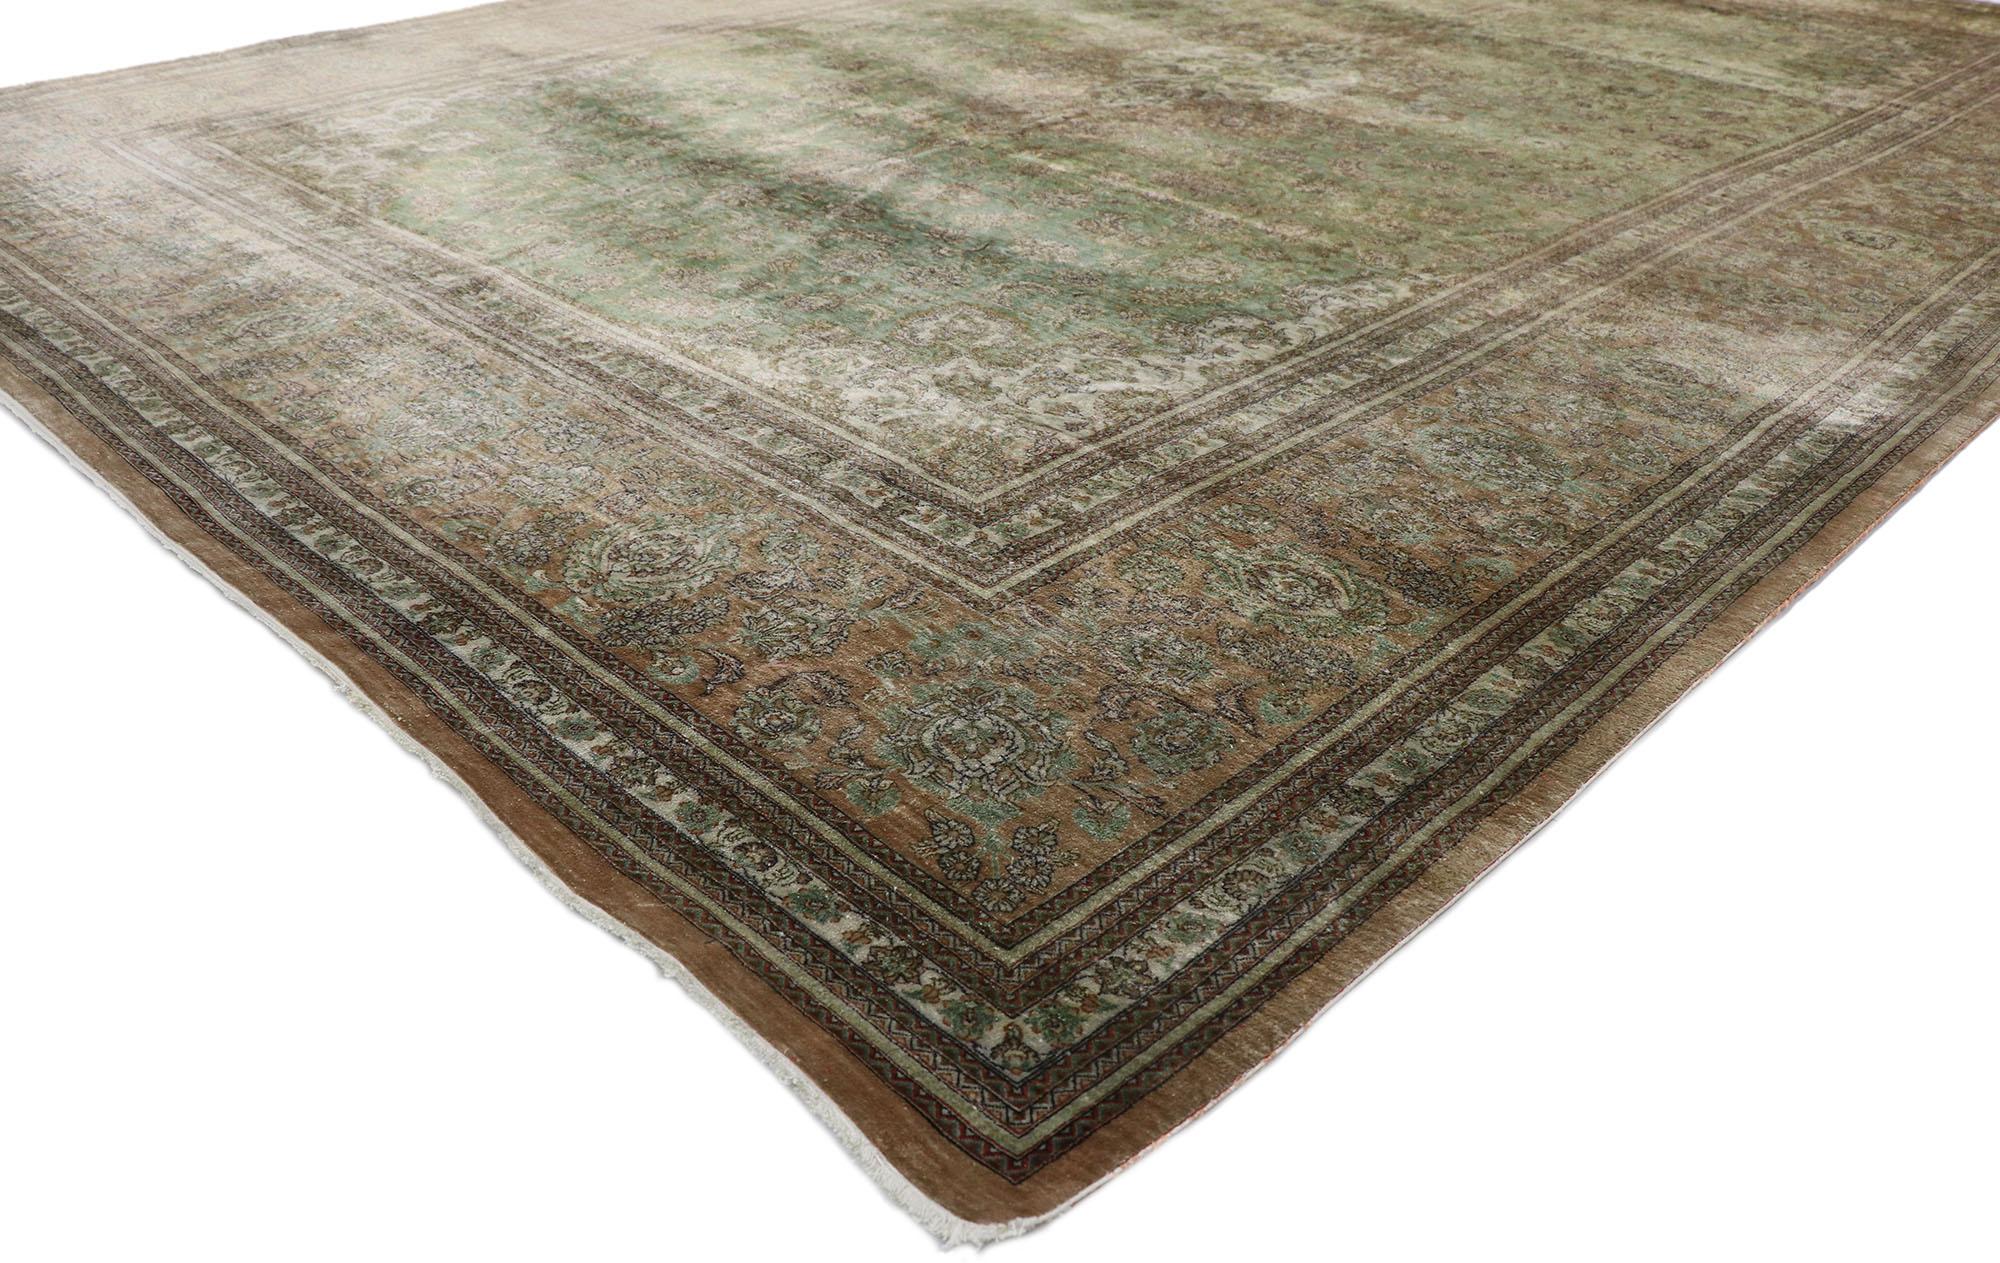 77706 Vintage Persian silk qum rug with warm Earth-tone Colors 08'00 x 11'05. Warm and inviting with incredible detail and texture, this hand-knotted silk vintage Persian Qum rug charms with ease. The silky field features an oval concentric